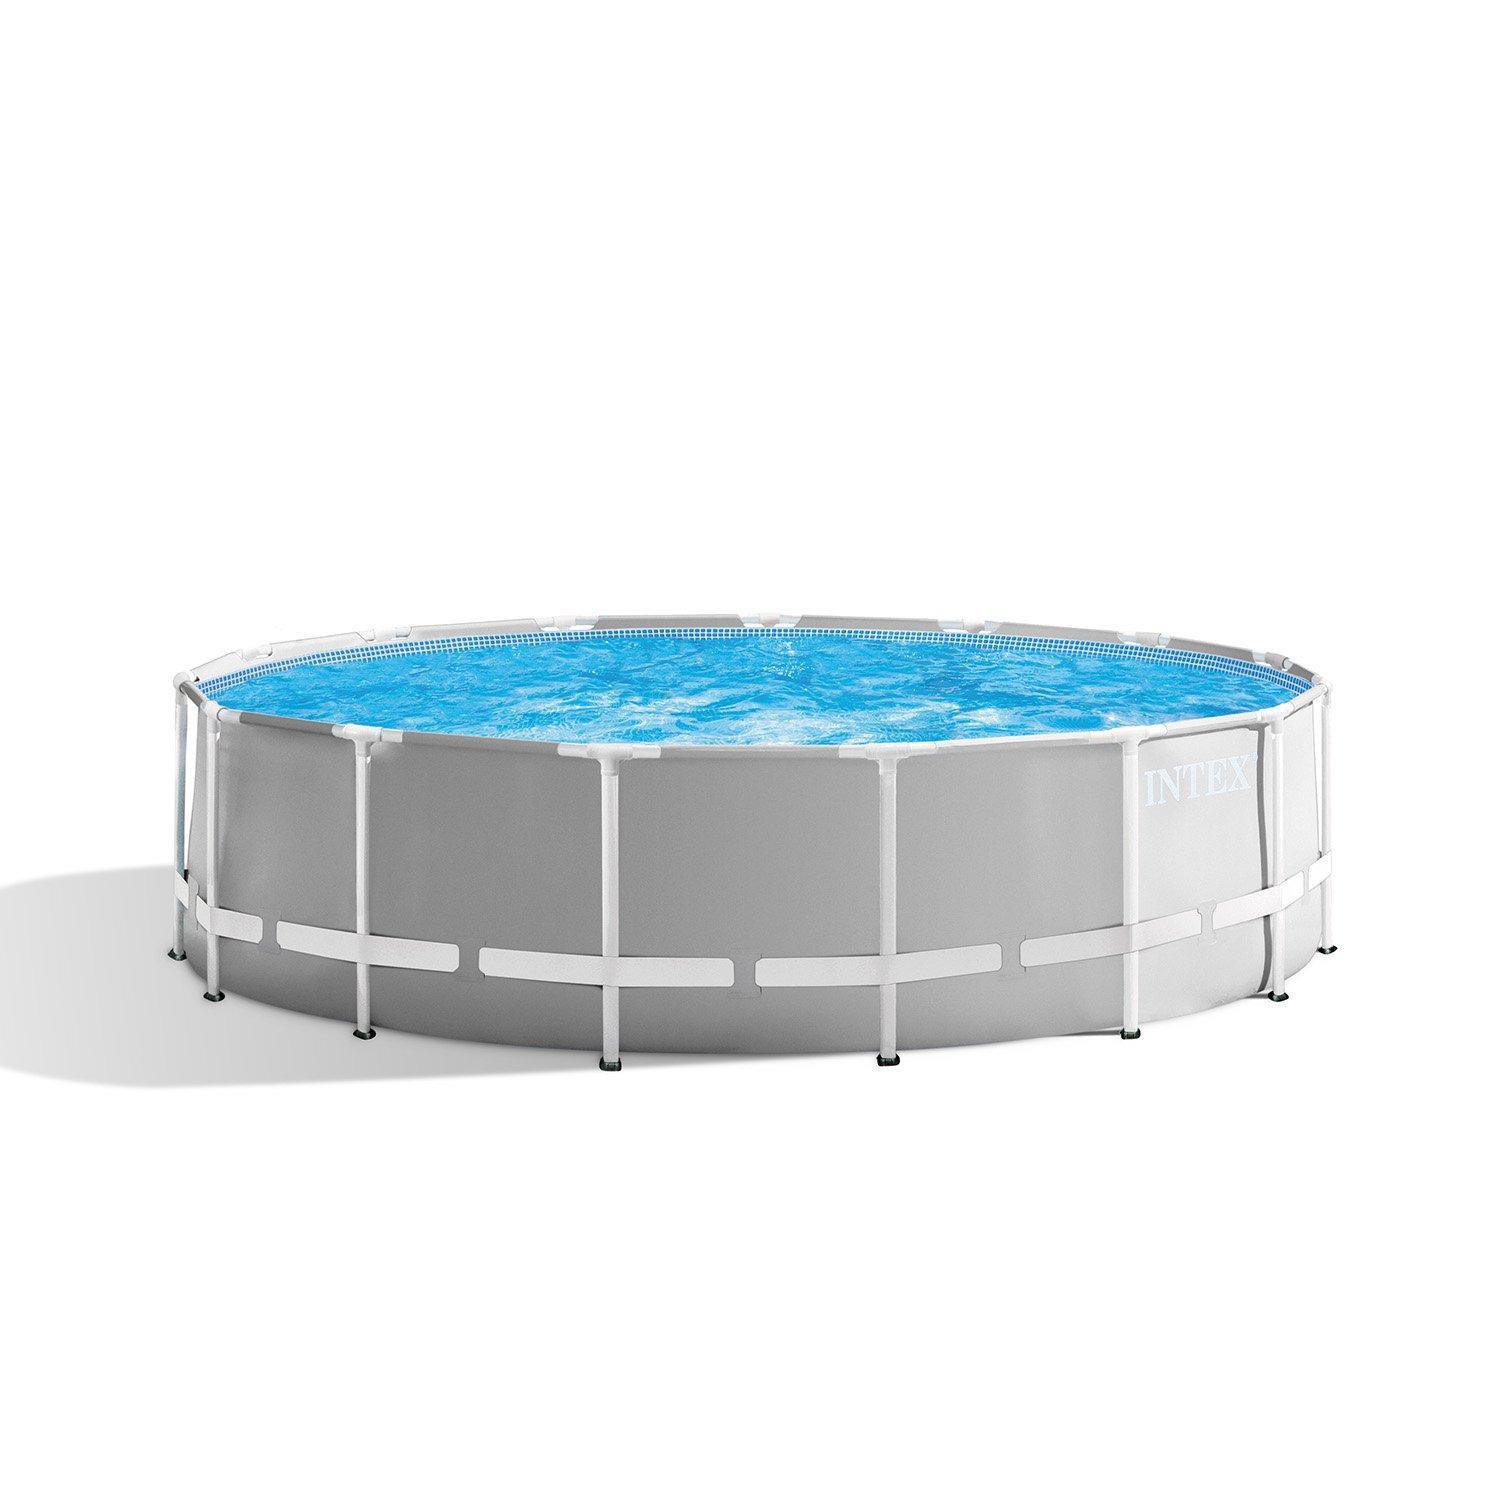 Intex 26726NP Prism Frame Swimming Pool 4.57m x 1.22m Round with Pump